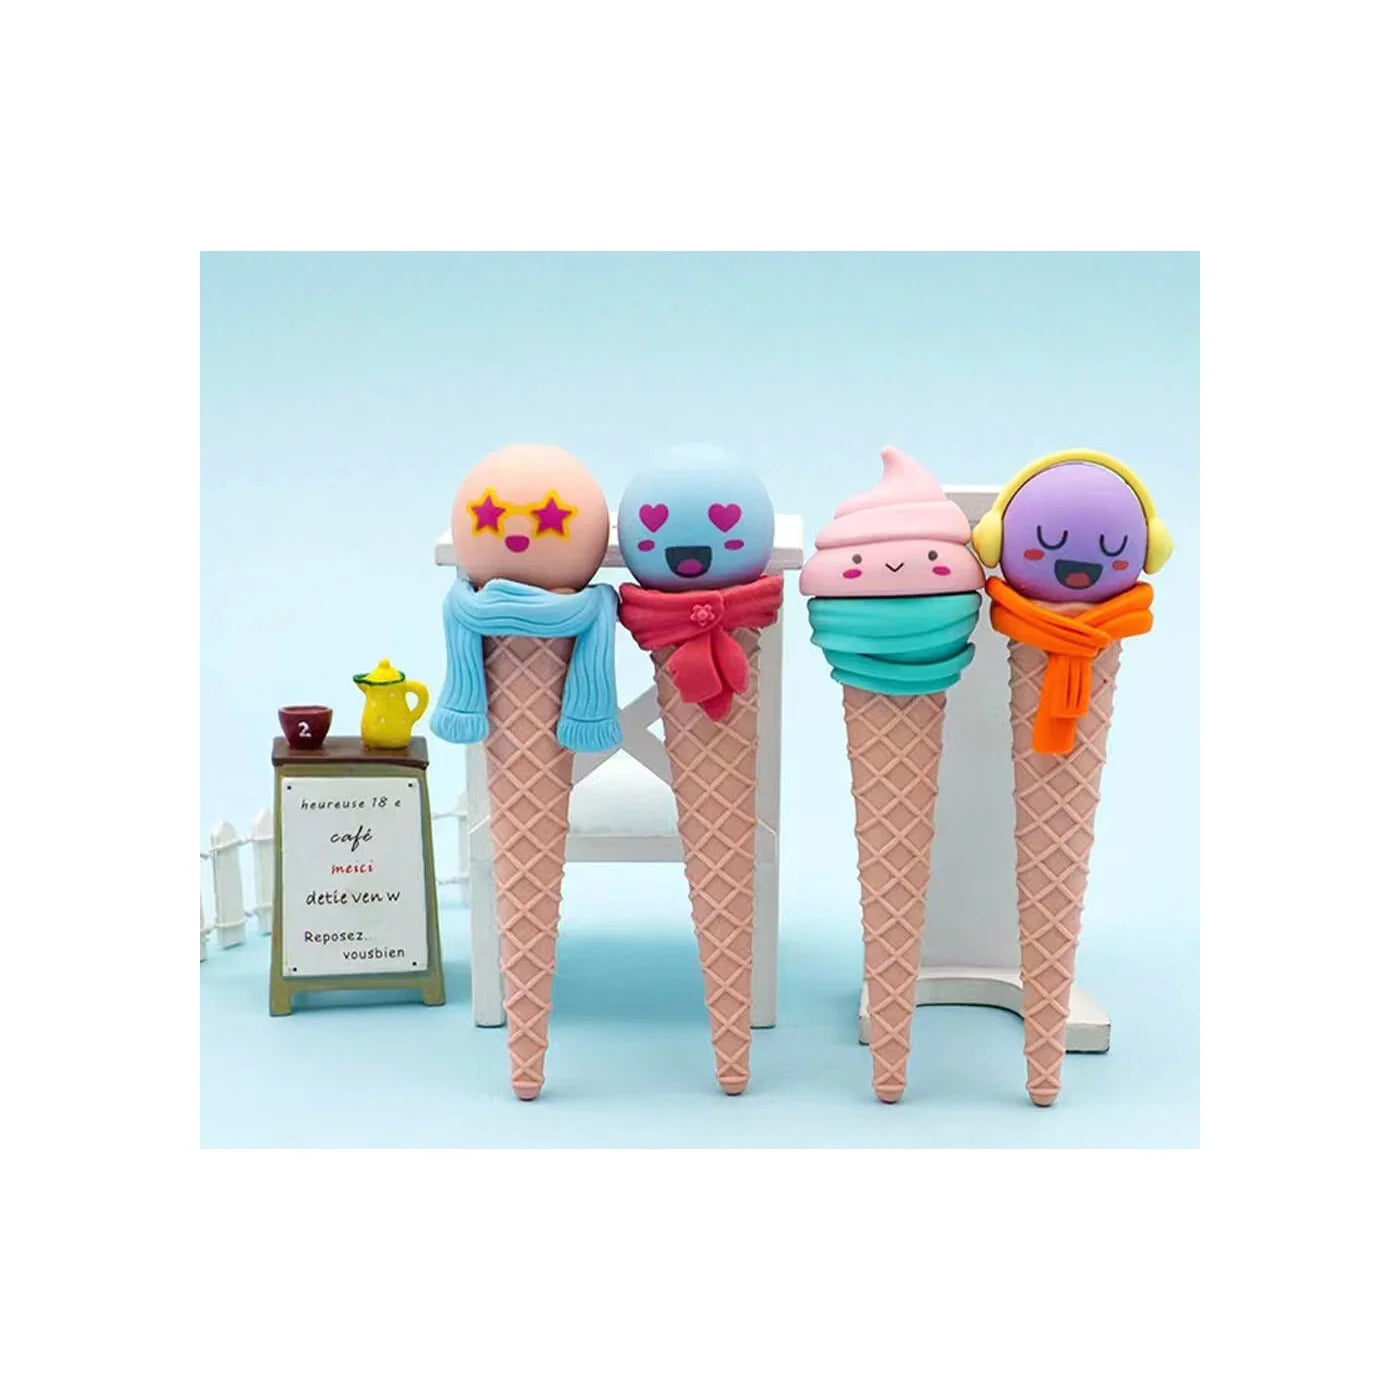 Funny Face Ice Cream Cone Shaped Eraser for Kids